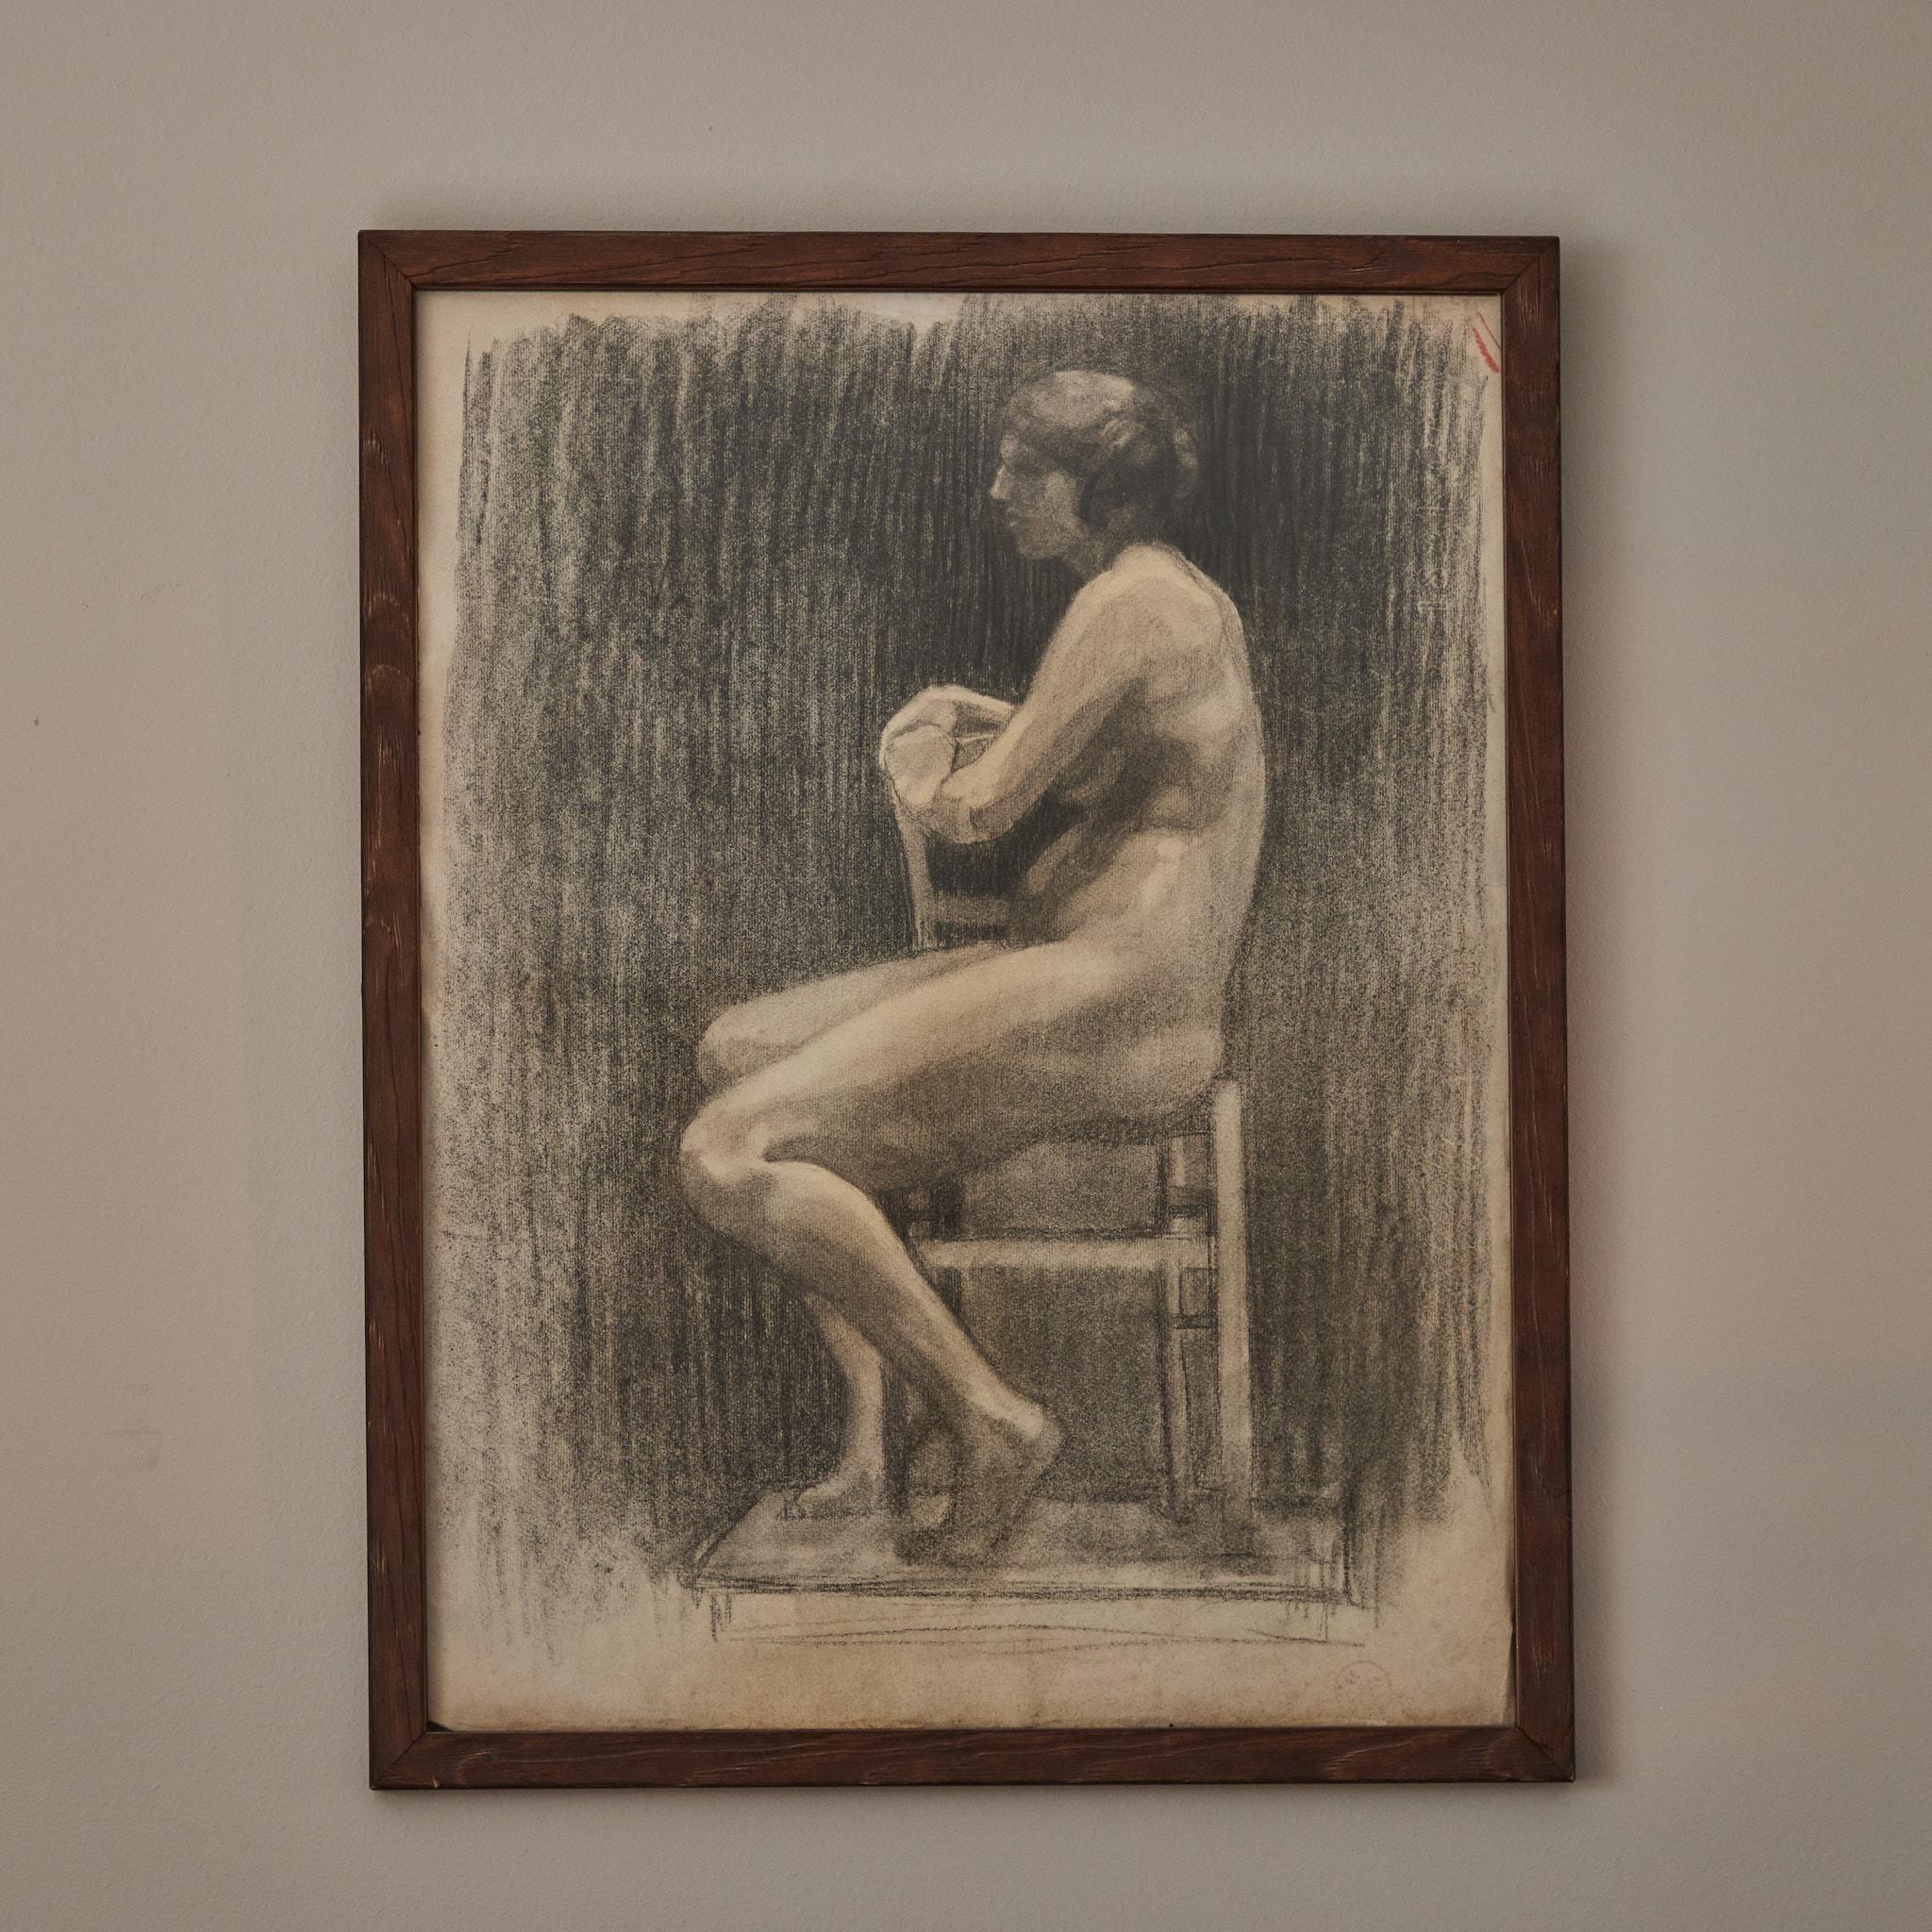 Early 20th-century French Academy-style charcoal drawing of seated nude female model. Mounted in a custom wood frame, the image has a pensive quality, and a beautiful treatment of light and shadow.